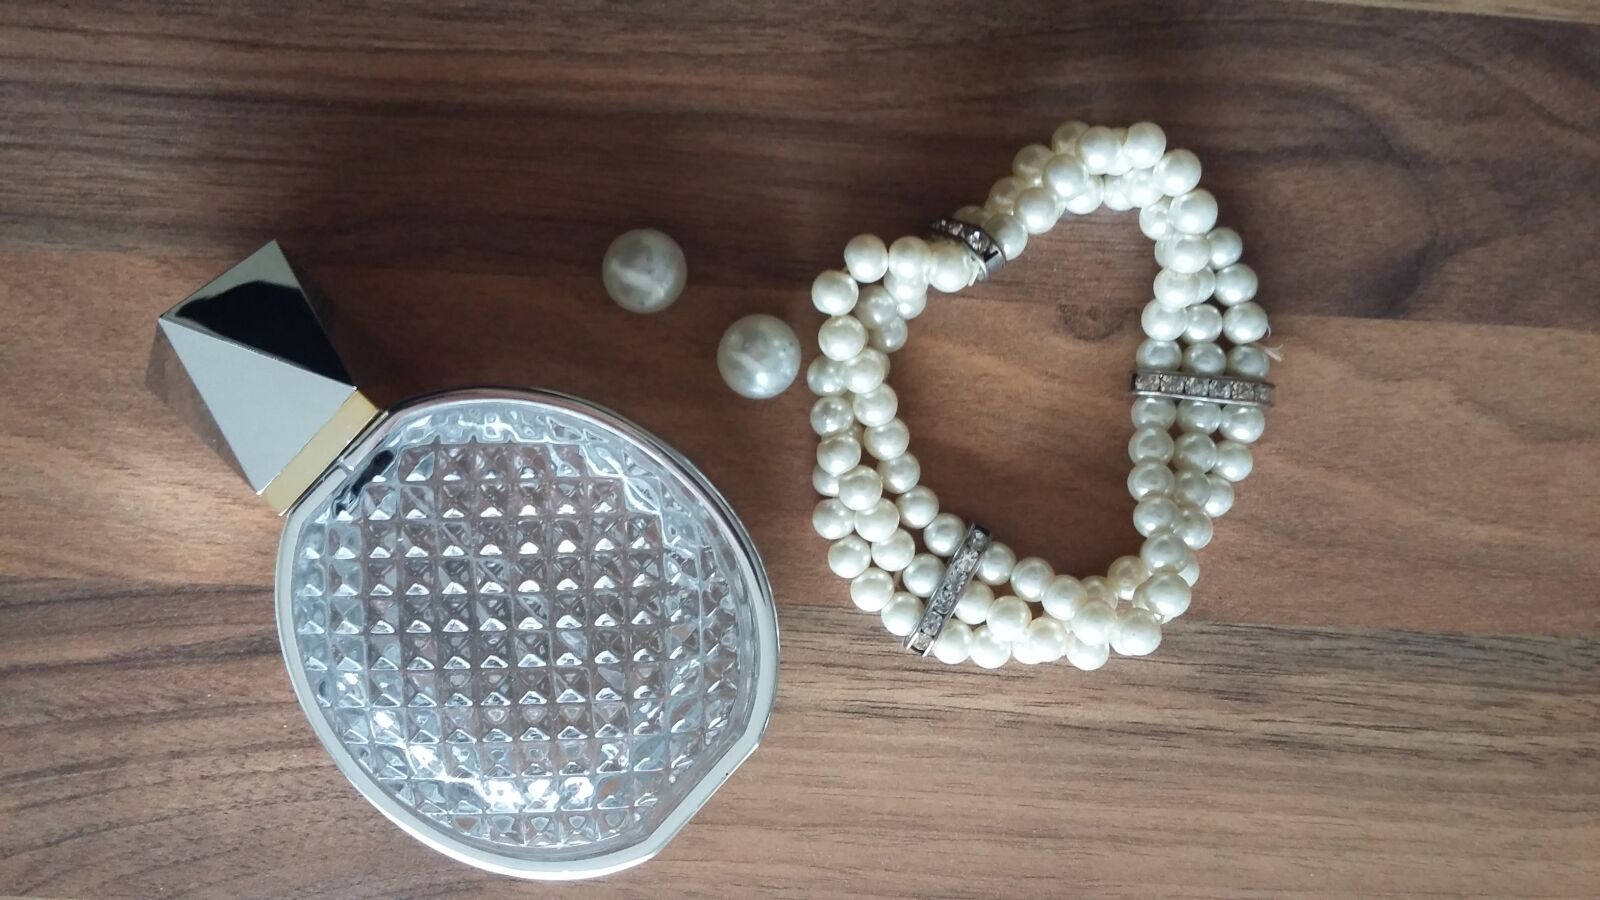 Samsung Galaxy A3 sample photo. Pearls, bottle, container photography